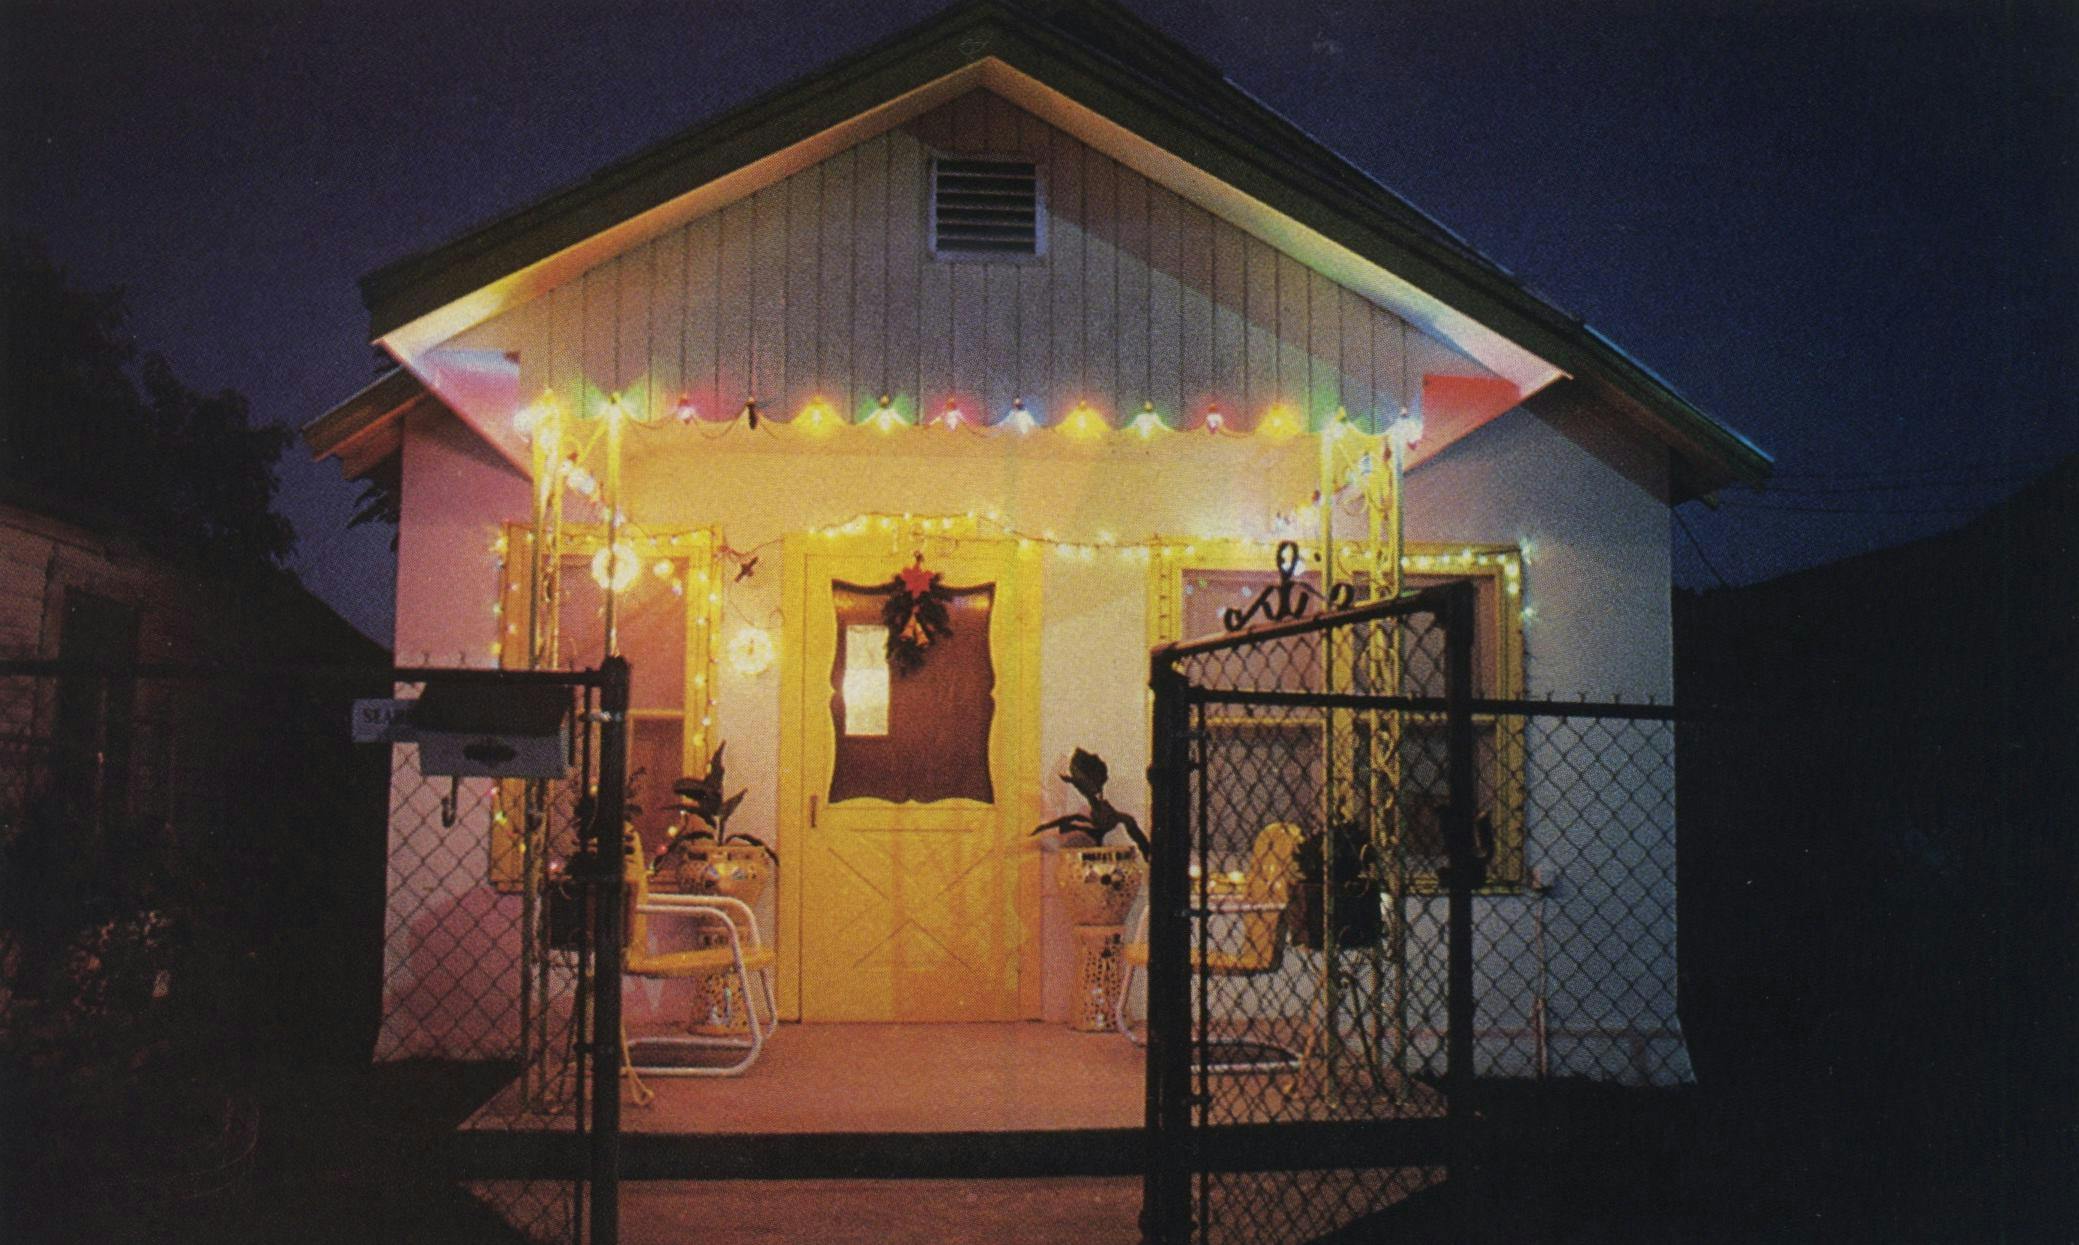 Margarita and Enrique Avila’s house in Brownsville is like a carol in pastels. During the traditional Mexican Christmas season—December 12 to January 6—their spiffily painted yellow and white house sprouts lights and a door decoration of evergreen sprays and golden bells. This is the thirteenth year of Christmas festooning for the Avilas.